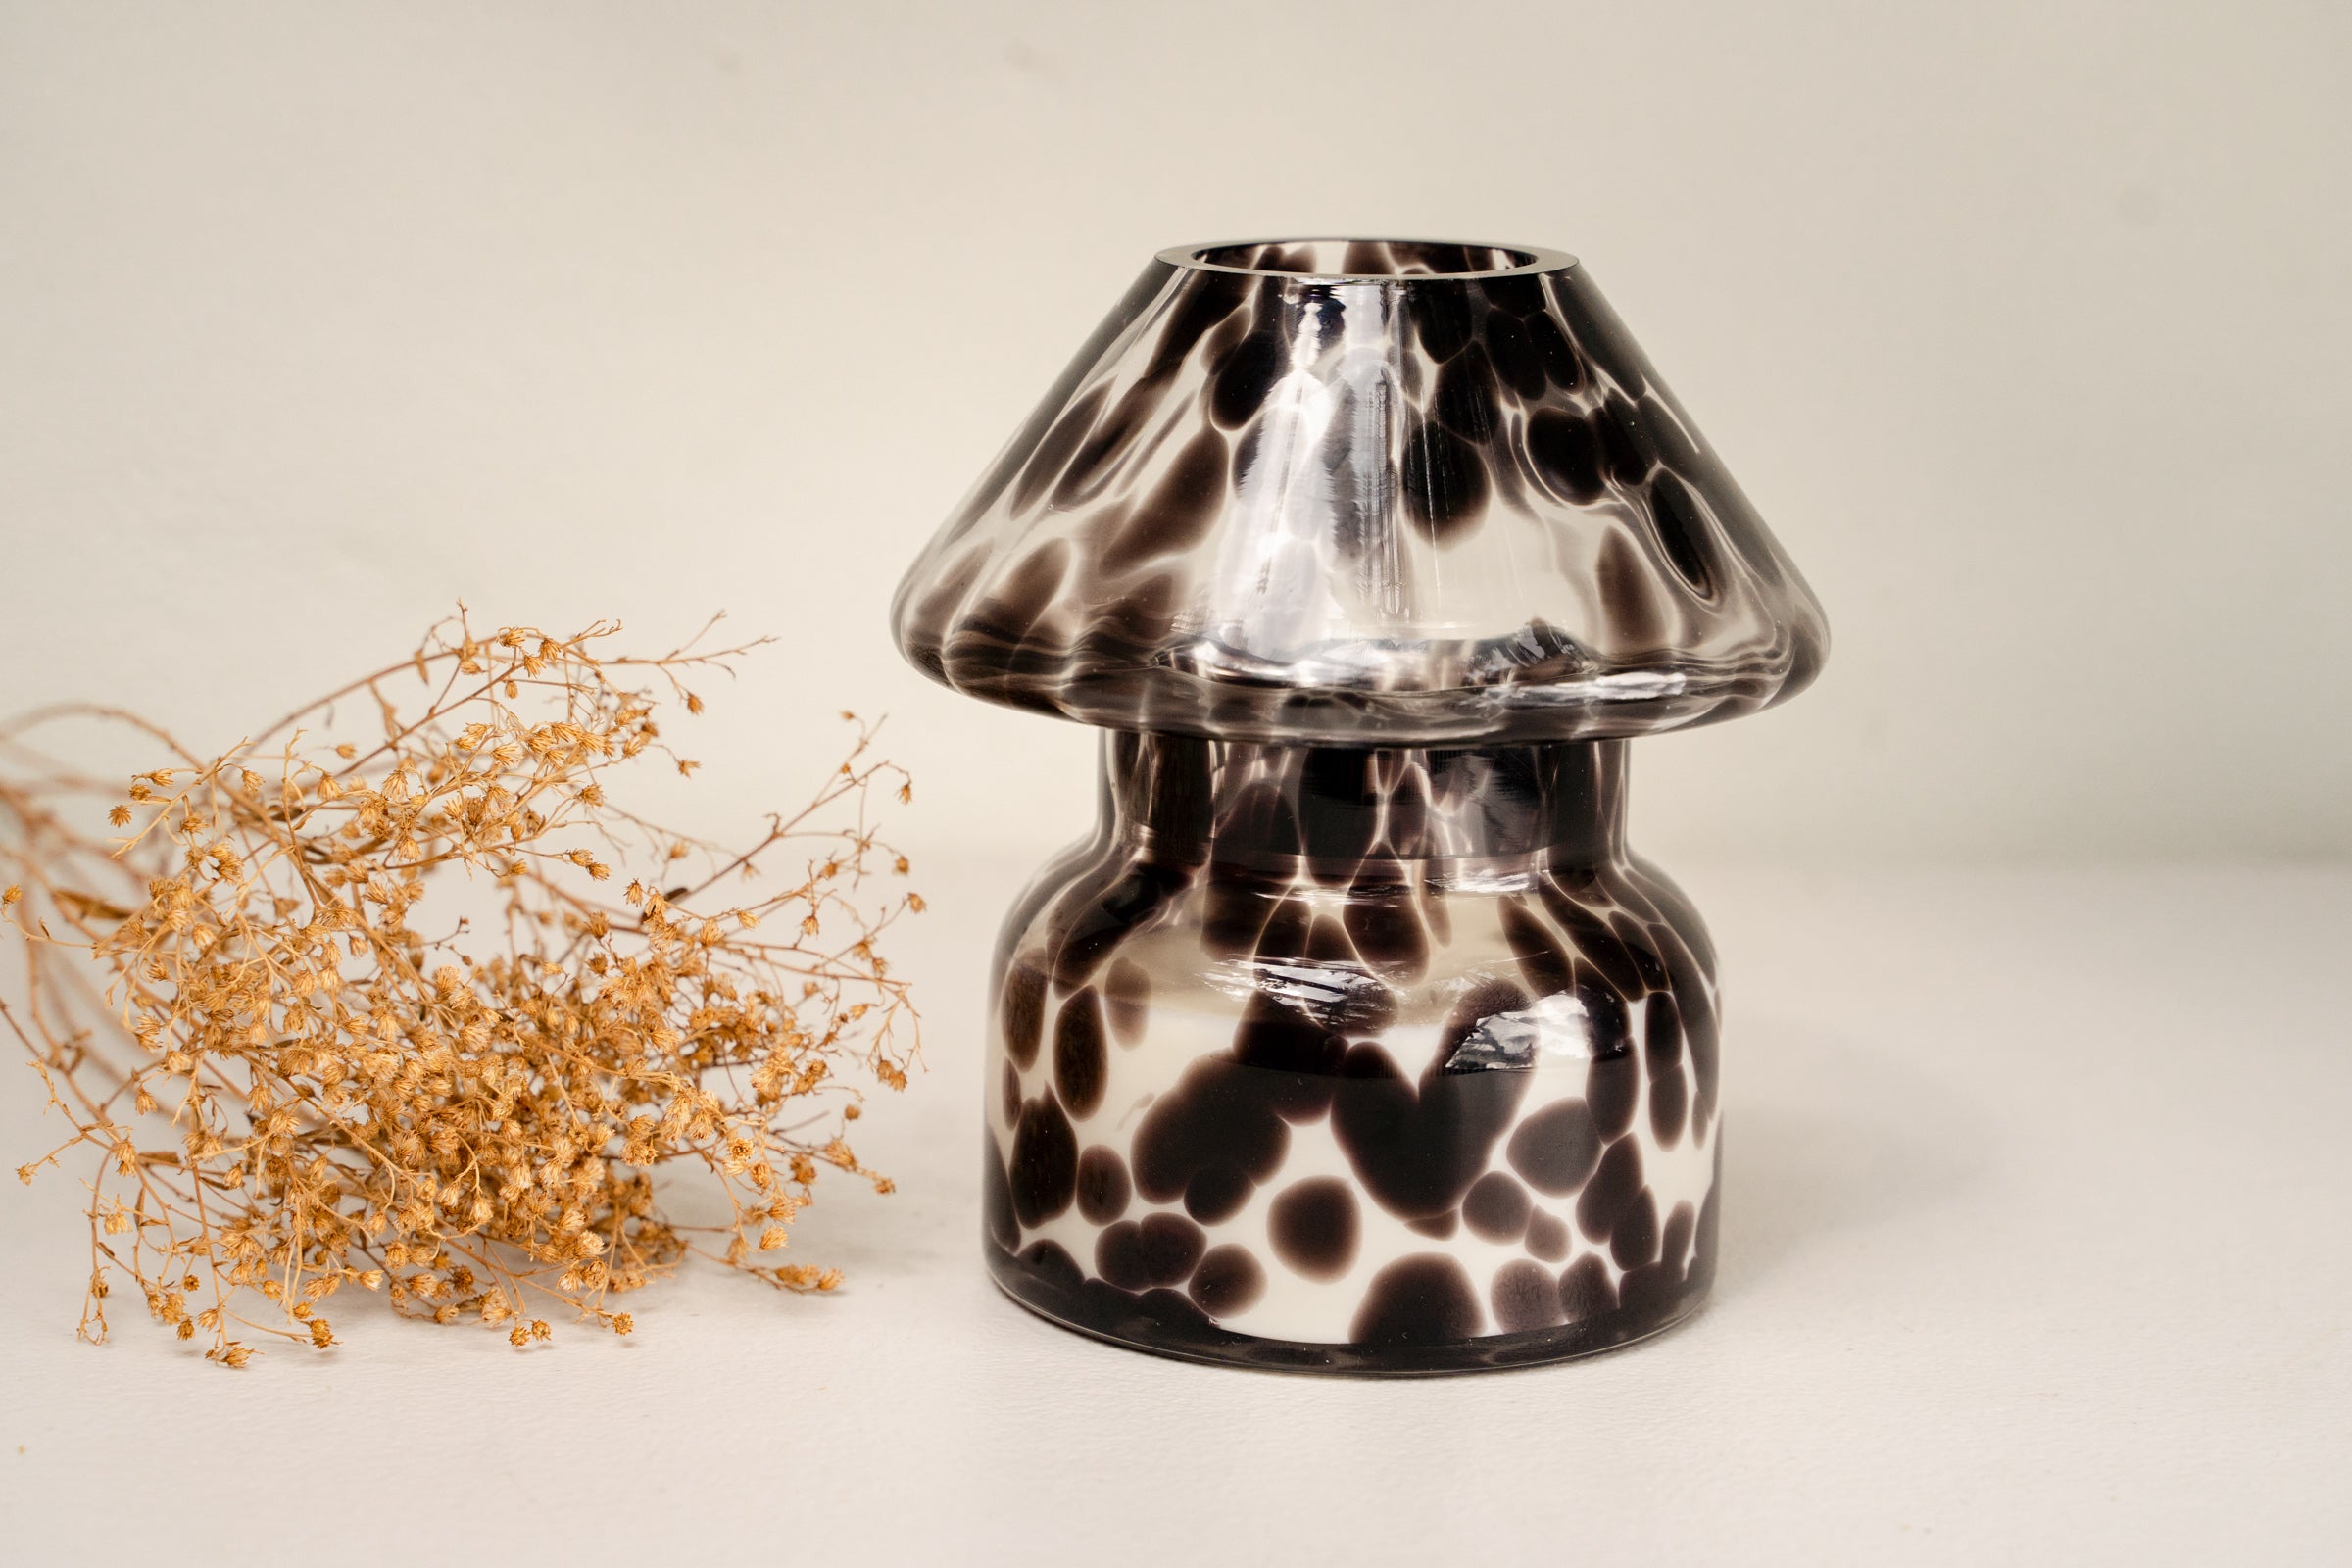 Mushroom candle lamp with black spots on clear glass. Filled with 100% soy wax with dried flowers.